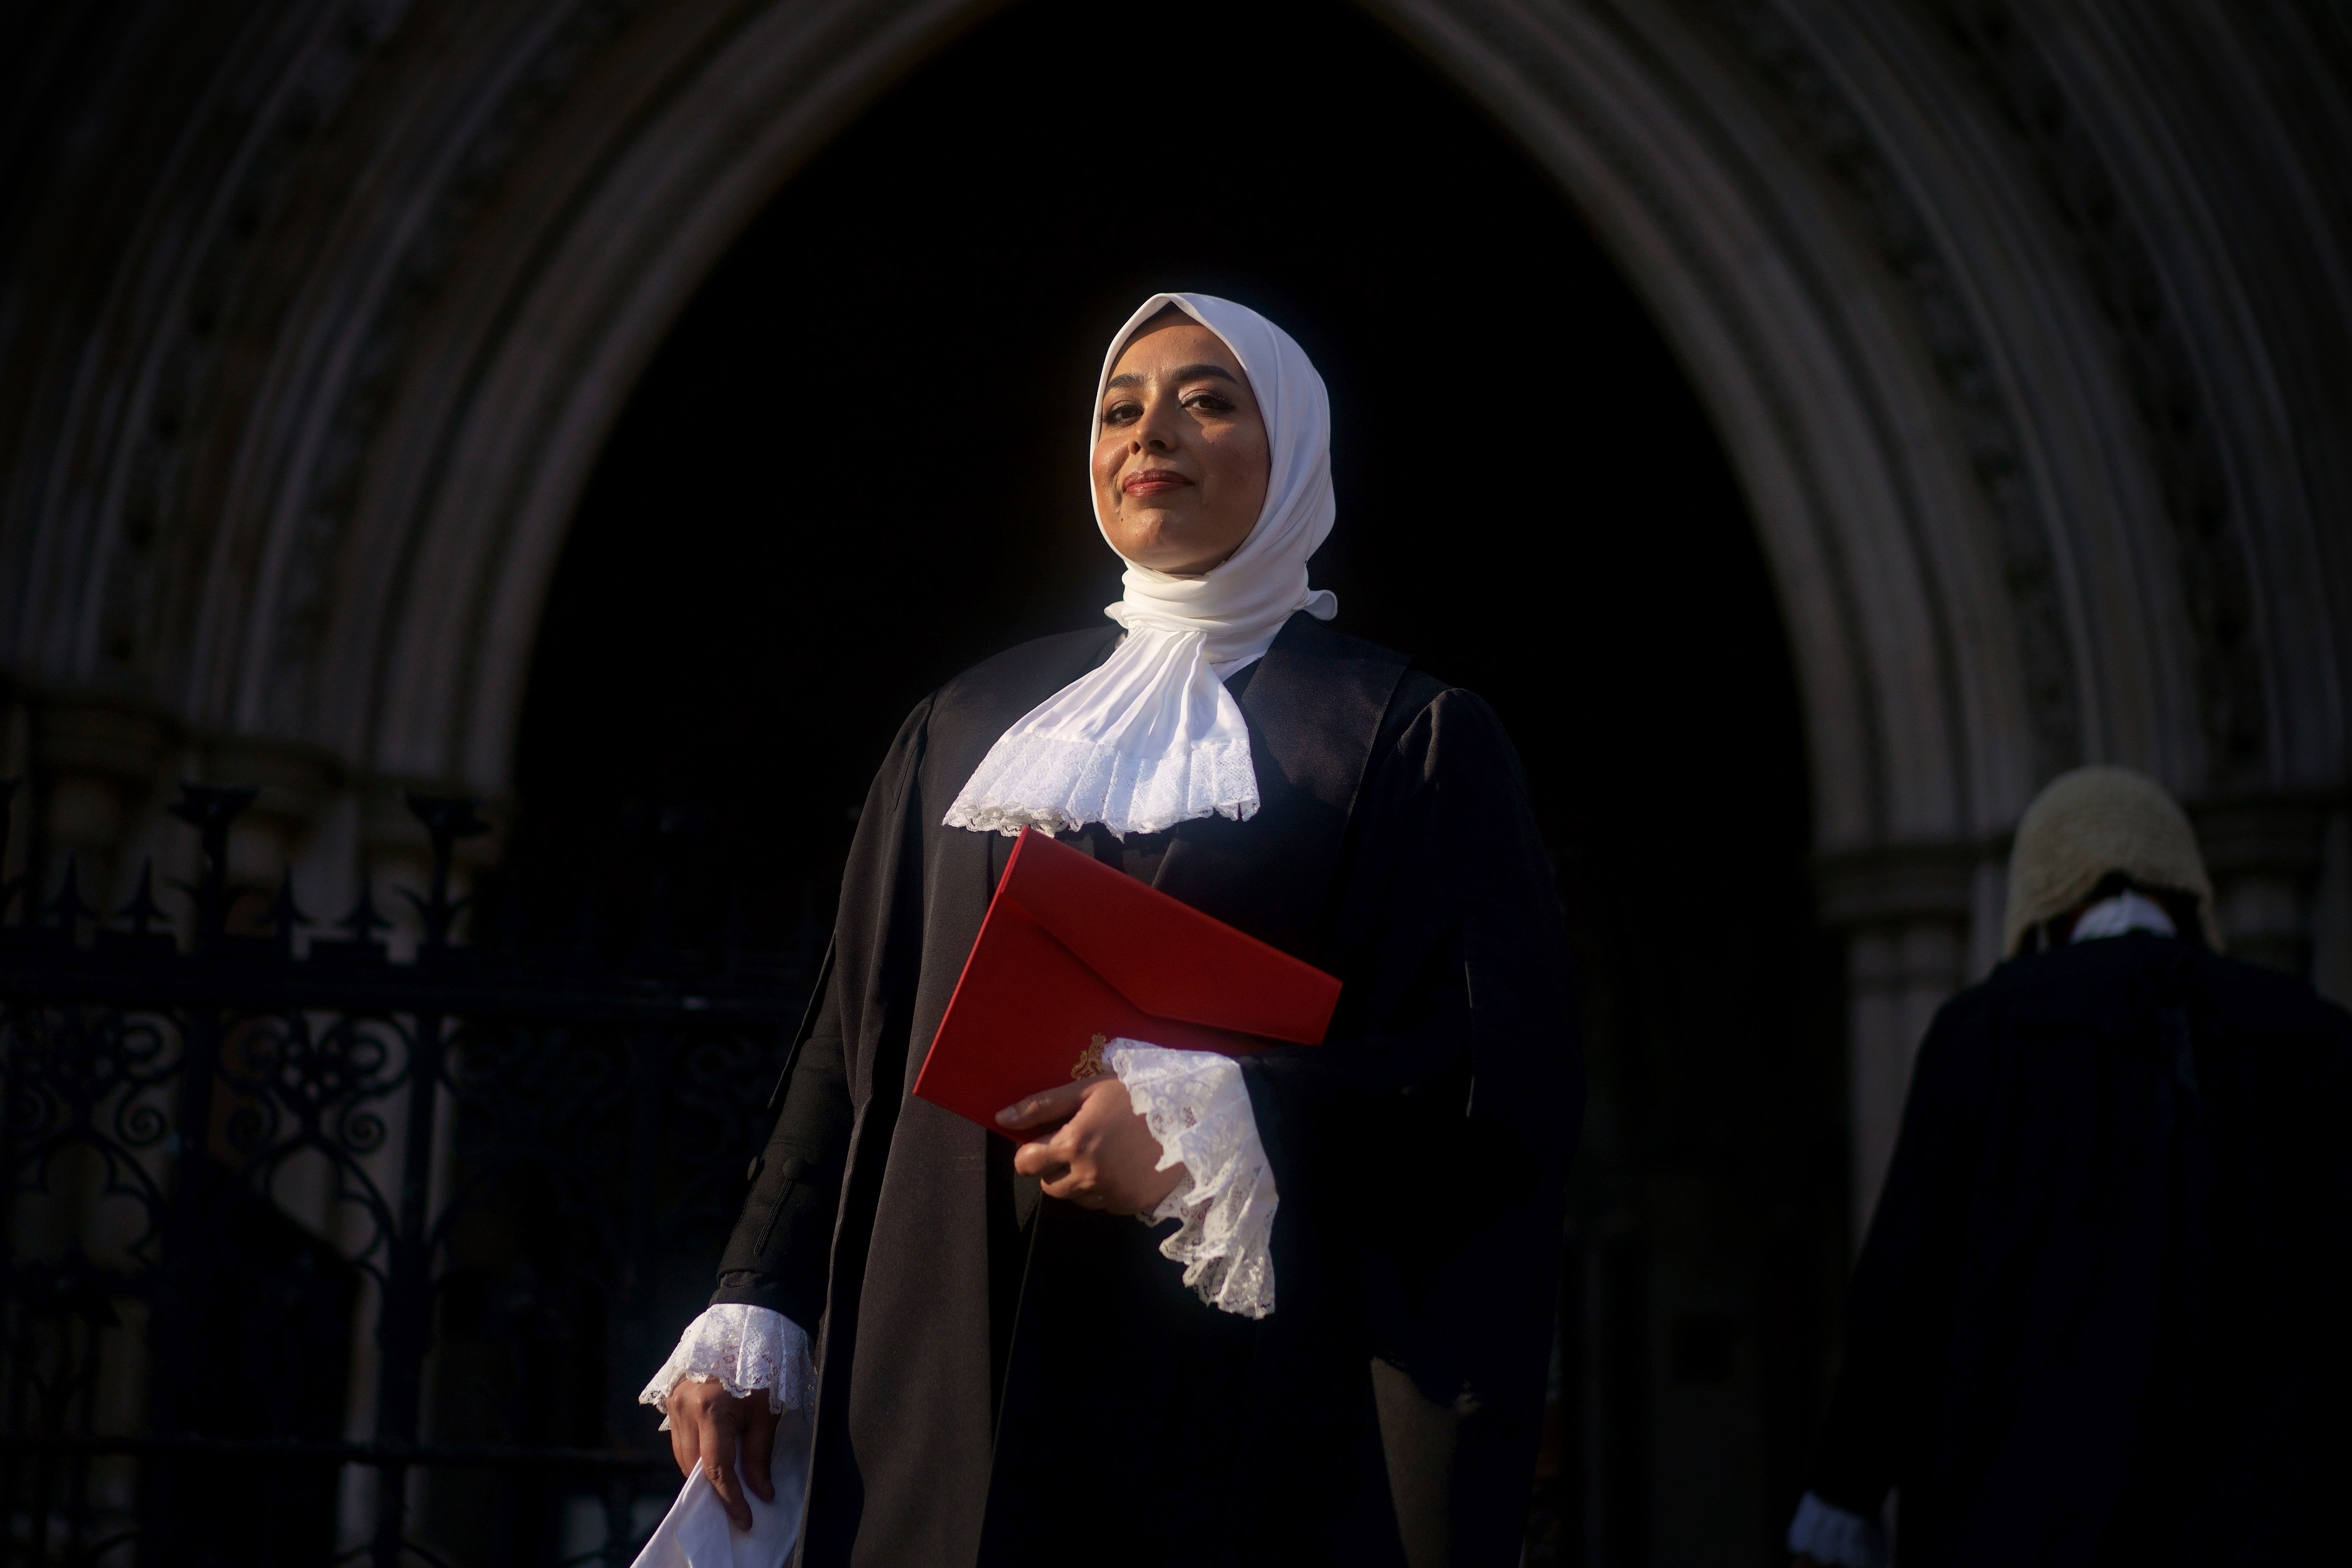 Sultana Tafadar KC outside the Royal Courts of Justice after receiving her Letters Patent – the document denoting the award for excellence in advocacy – in a ceremony at the Palace of Westminster (Victoria Jones/PA)